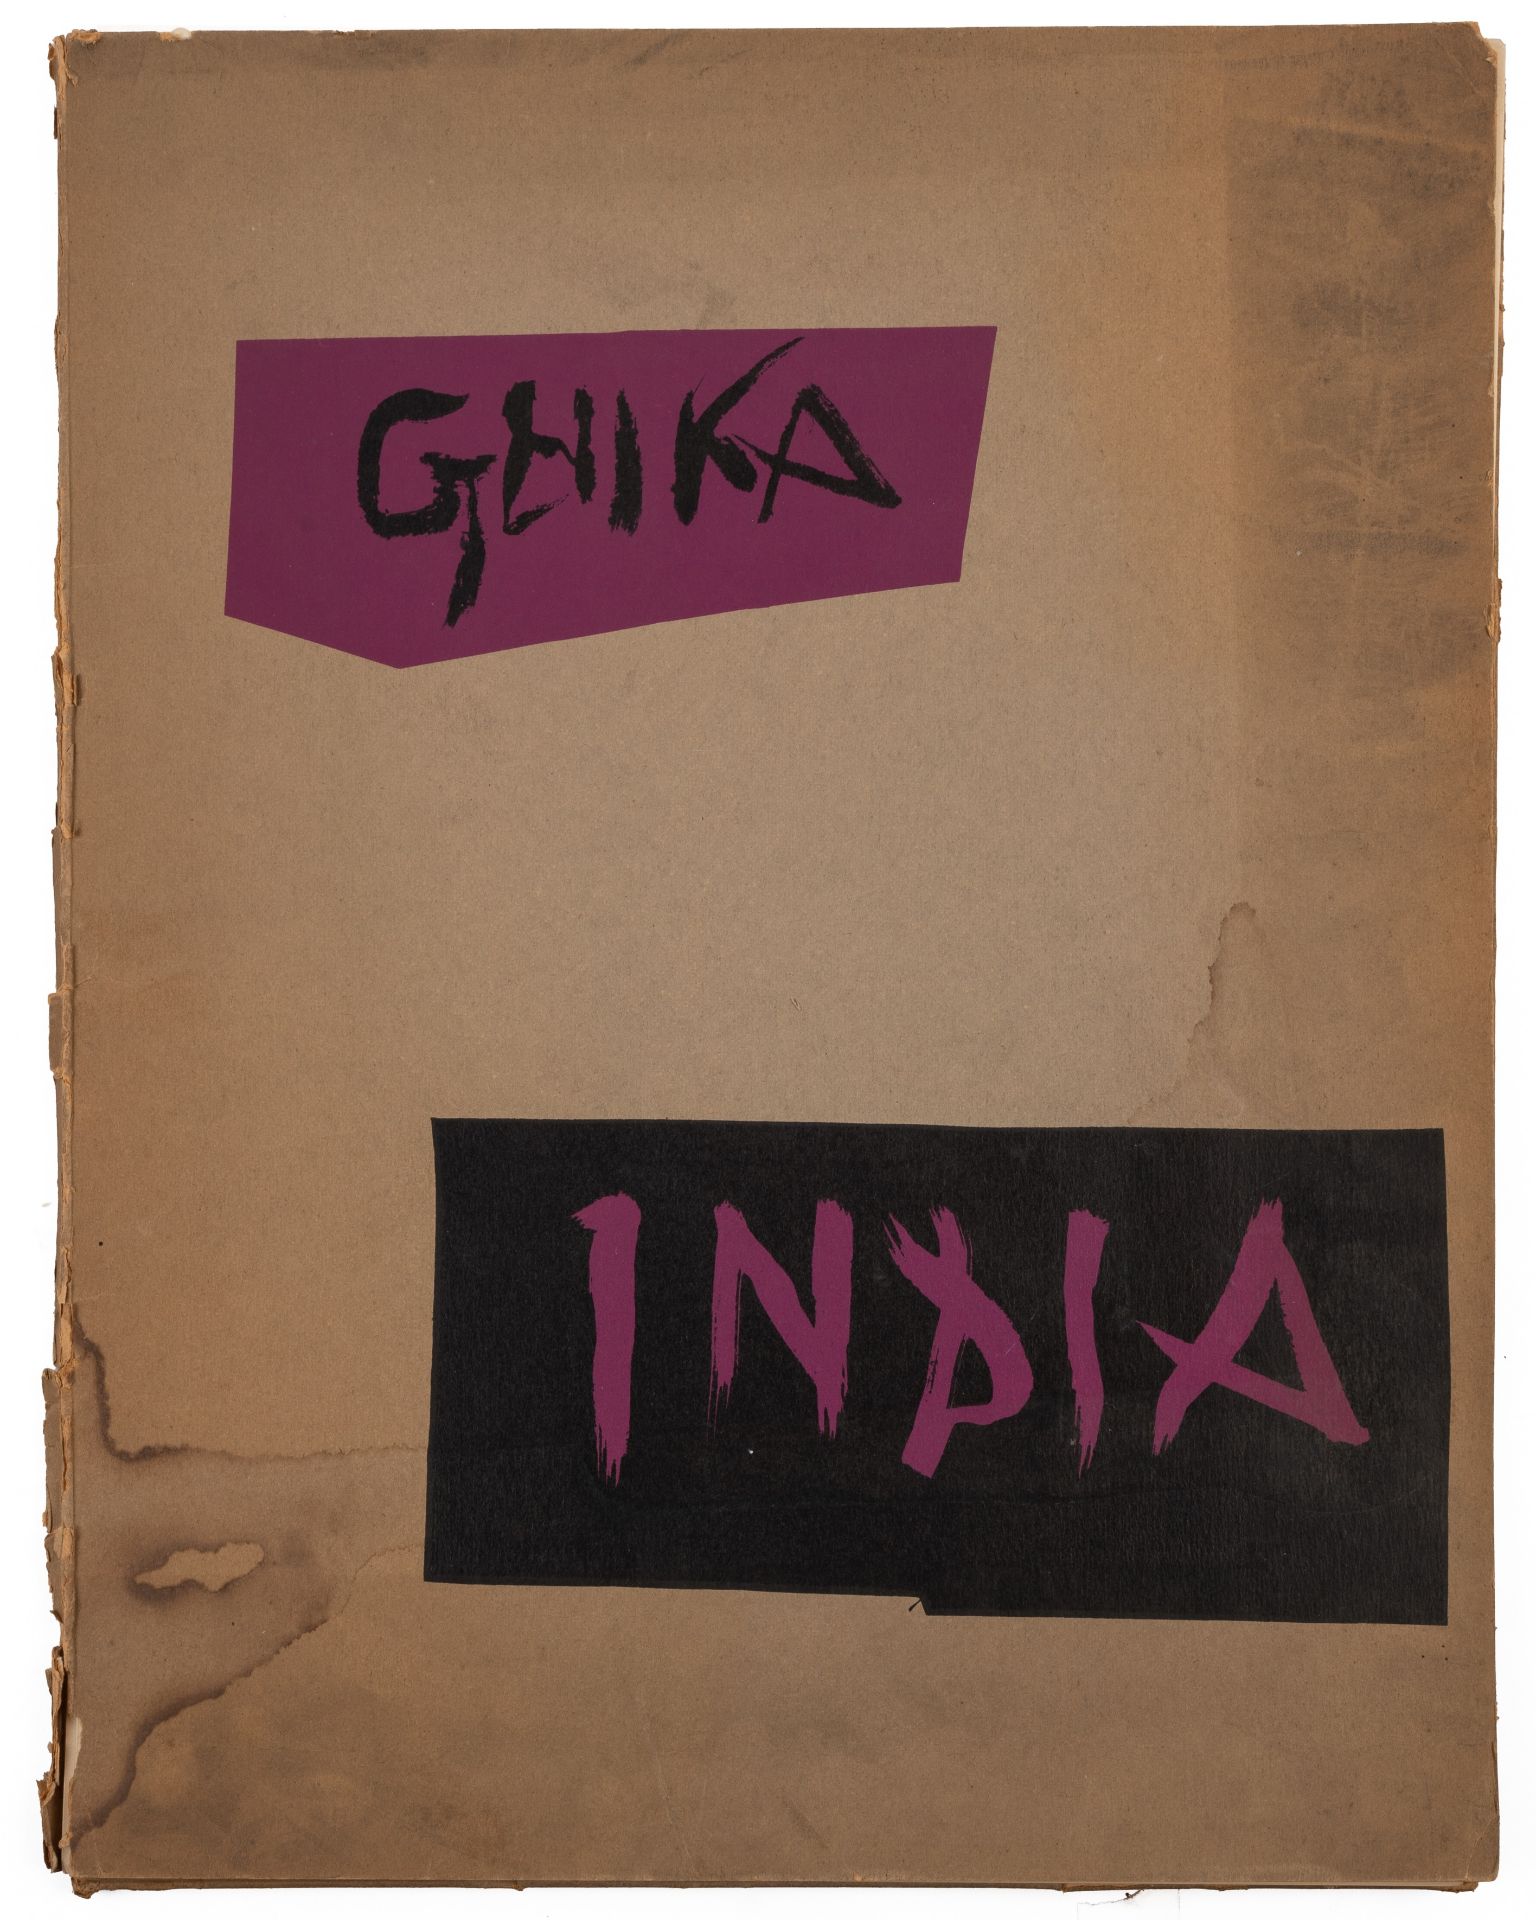 India. A portfolio of twelve lithographed plates with printed text translated by Patrick Leigh